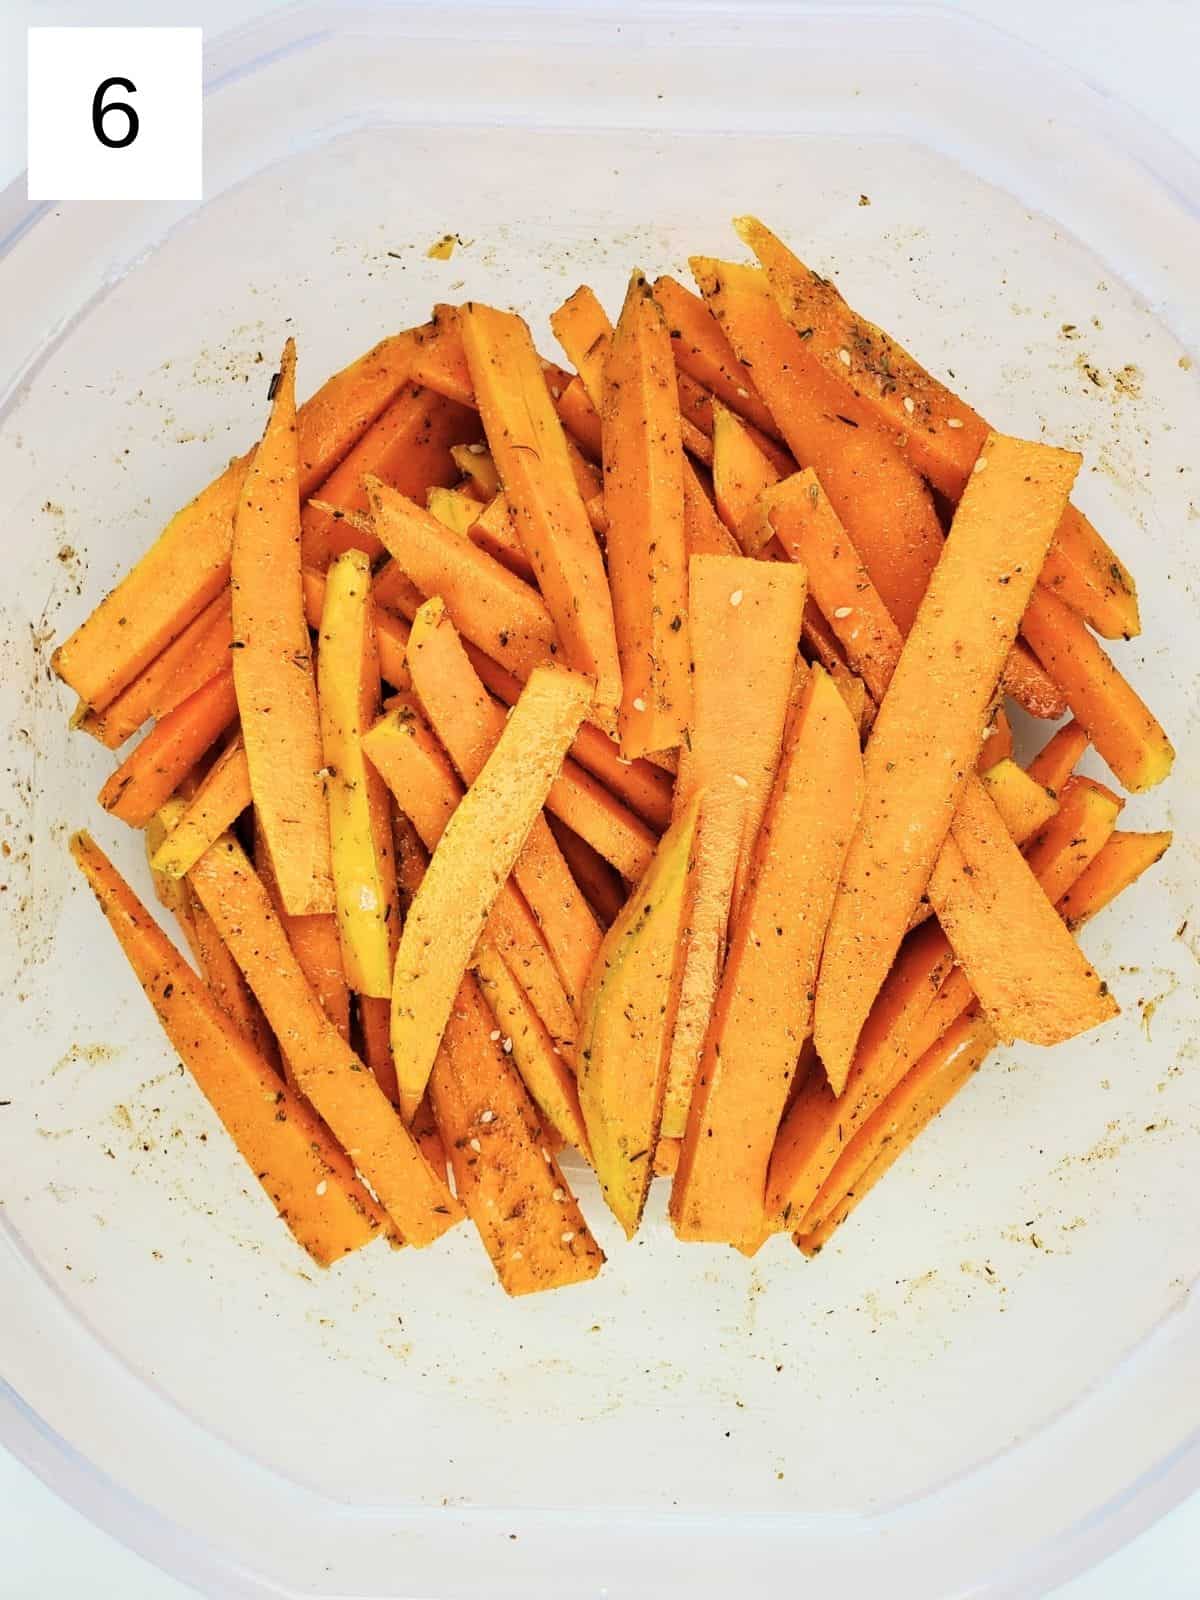 butternut squash slices, coated with seasonings, in a bowl.